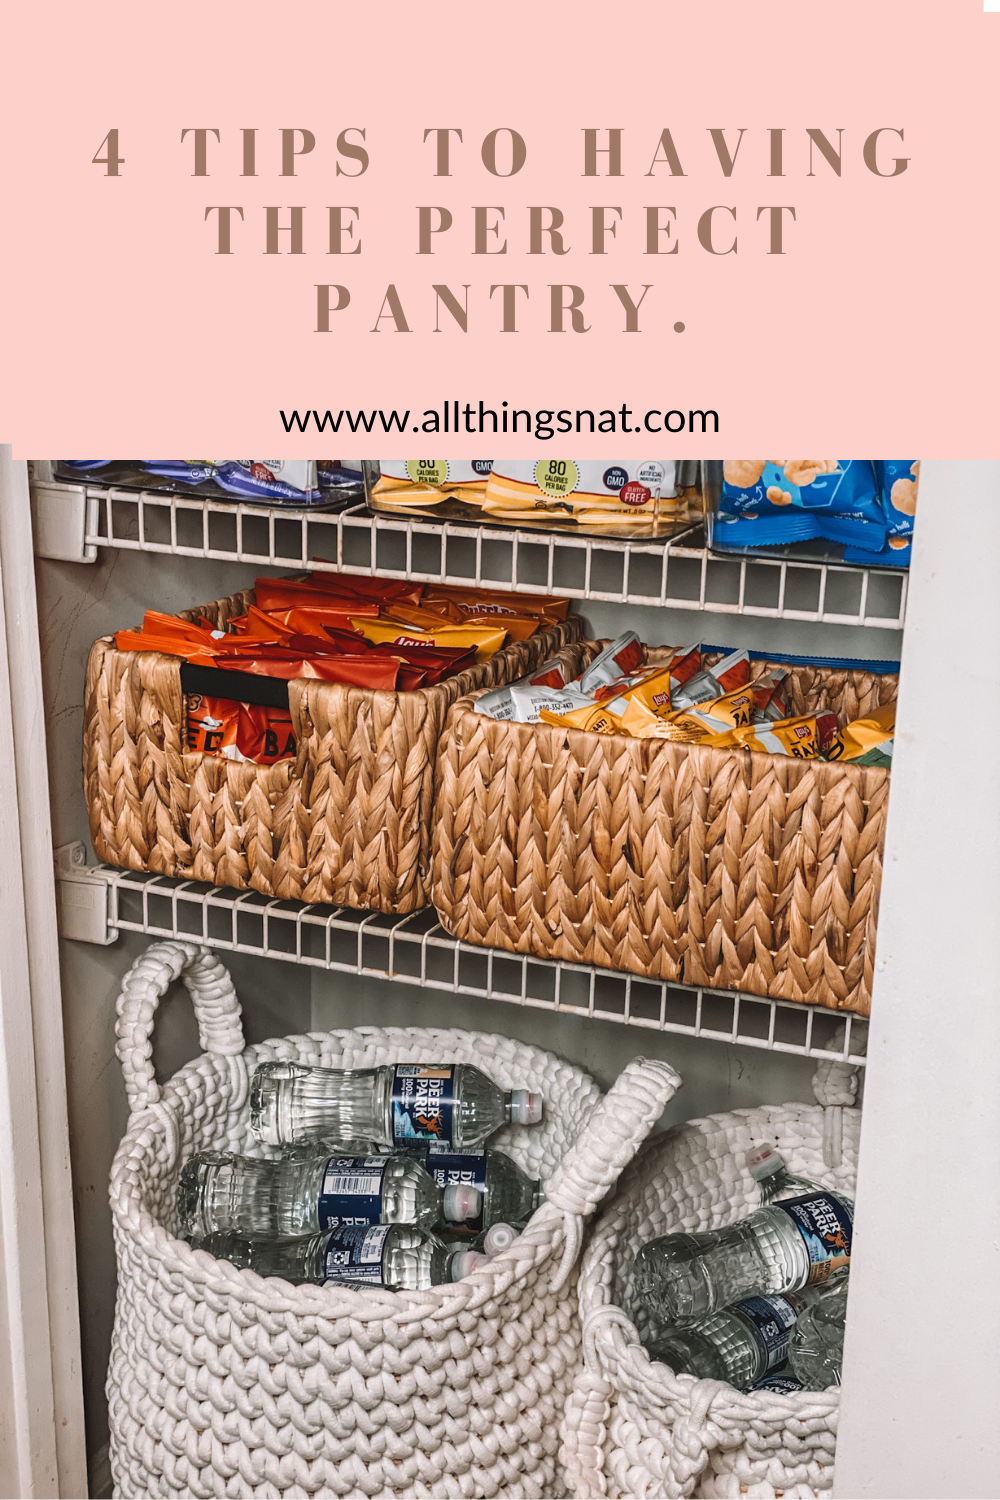 How to Organize Your Pantry - Pantry Organization Tips